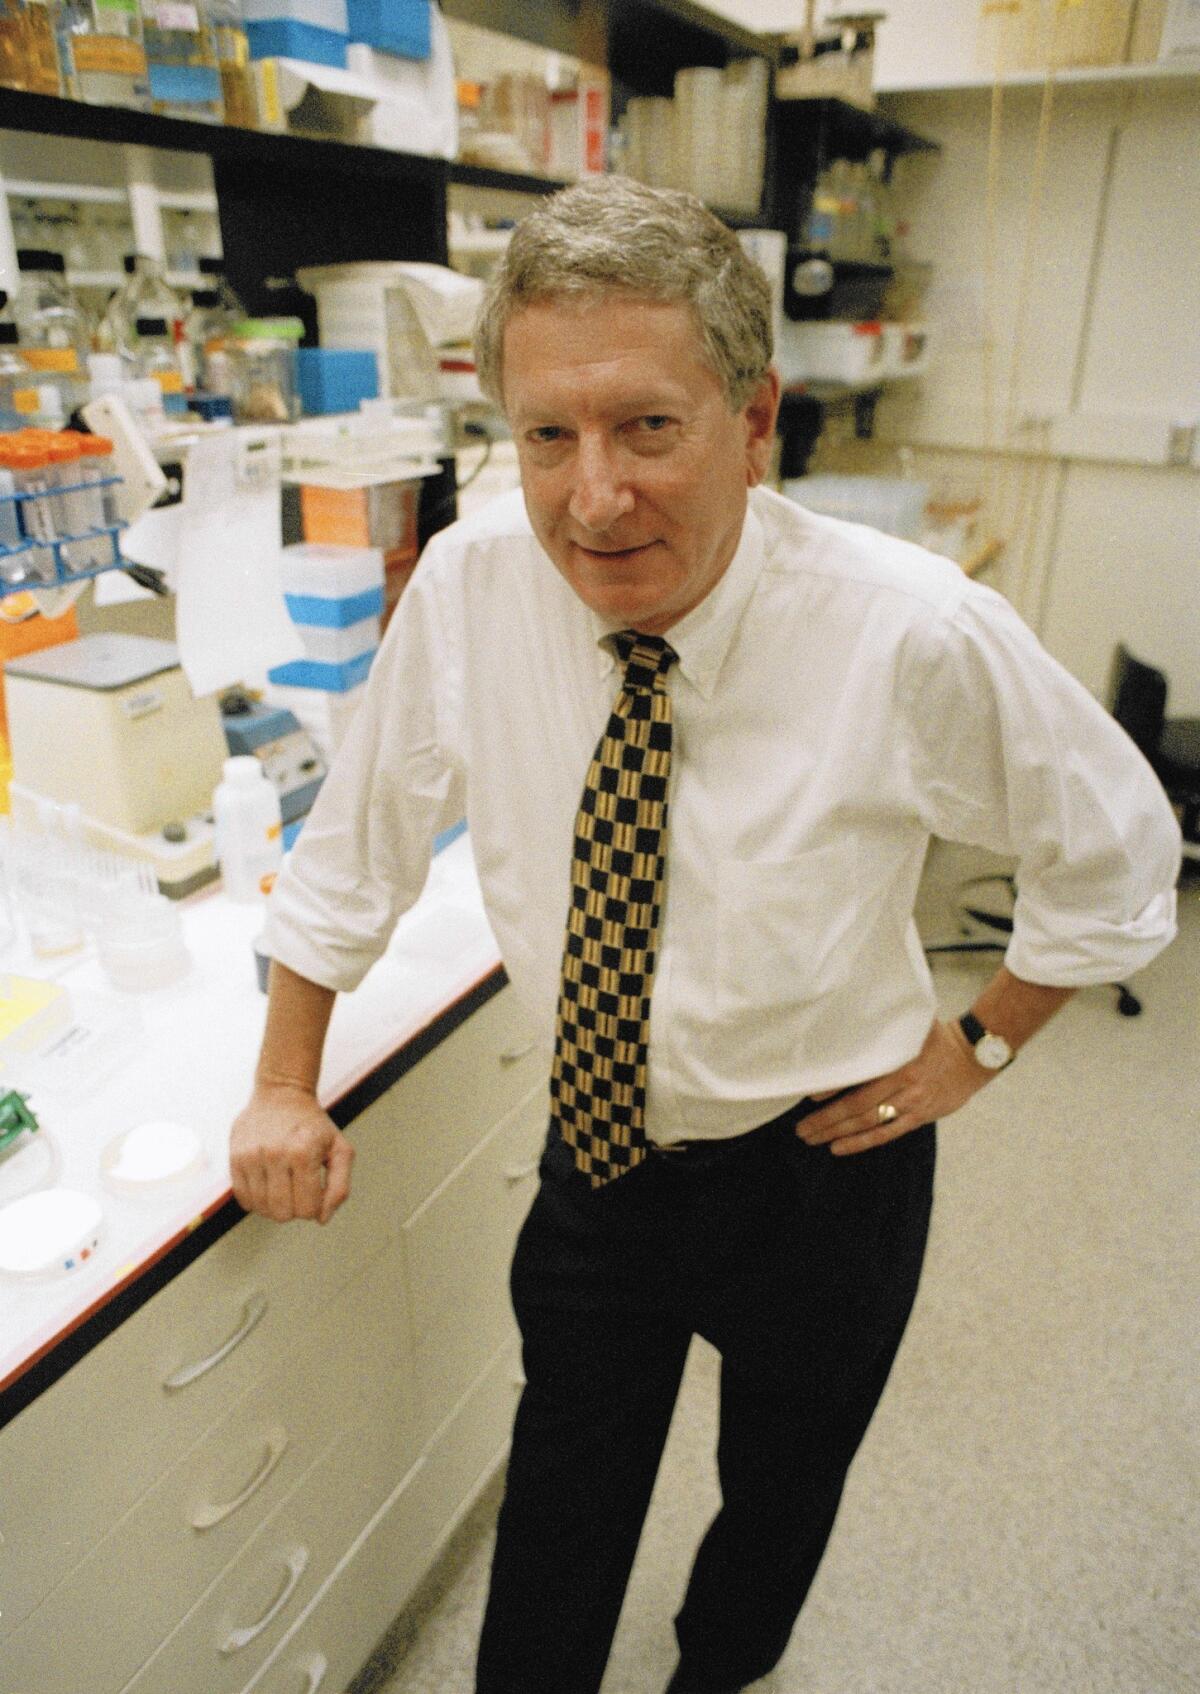 Alfred Gilman shared a 1994 Nobel Prize in physiology or medicine with Martin Rodbell of the National Institute of Environmental Health Sciences for their discovery of G proteins. The proteins help in the process of receiving signals from outside the cell and activating responses.